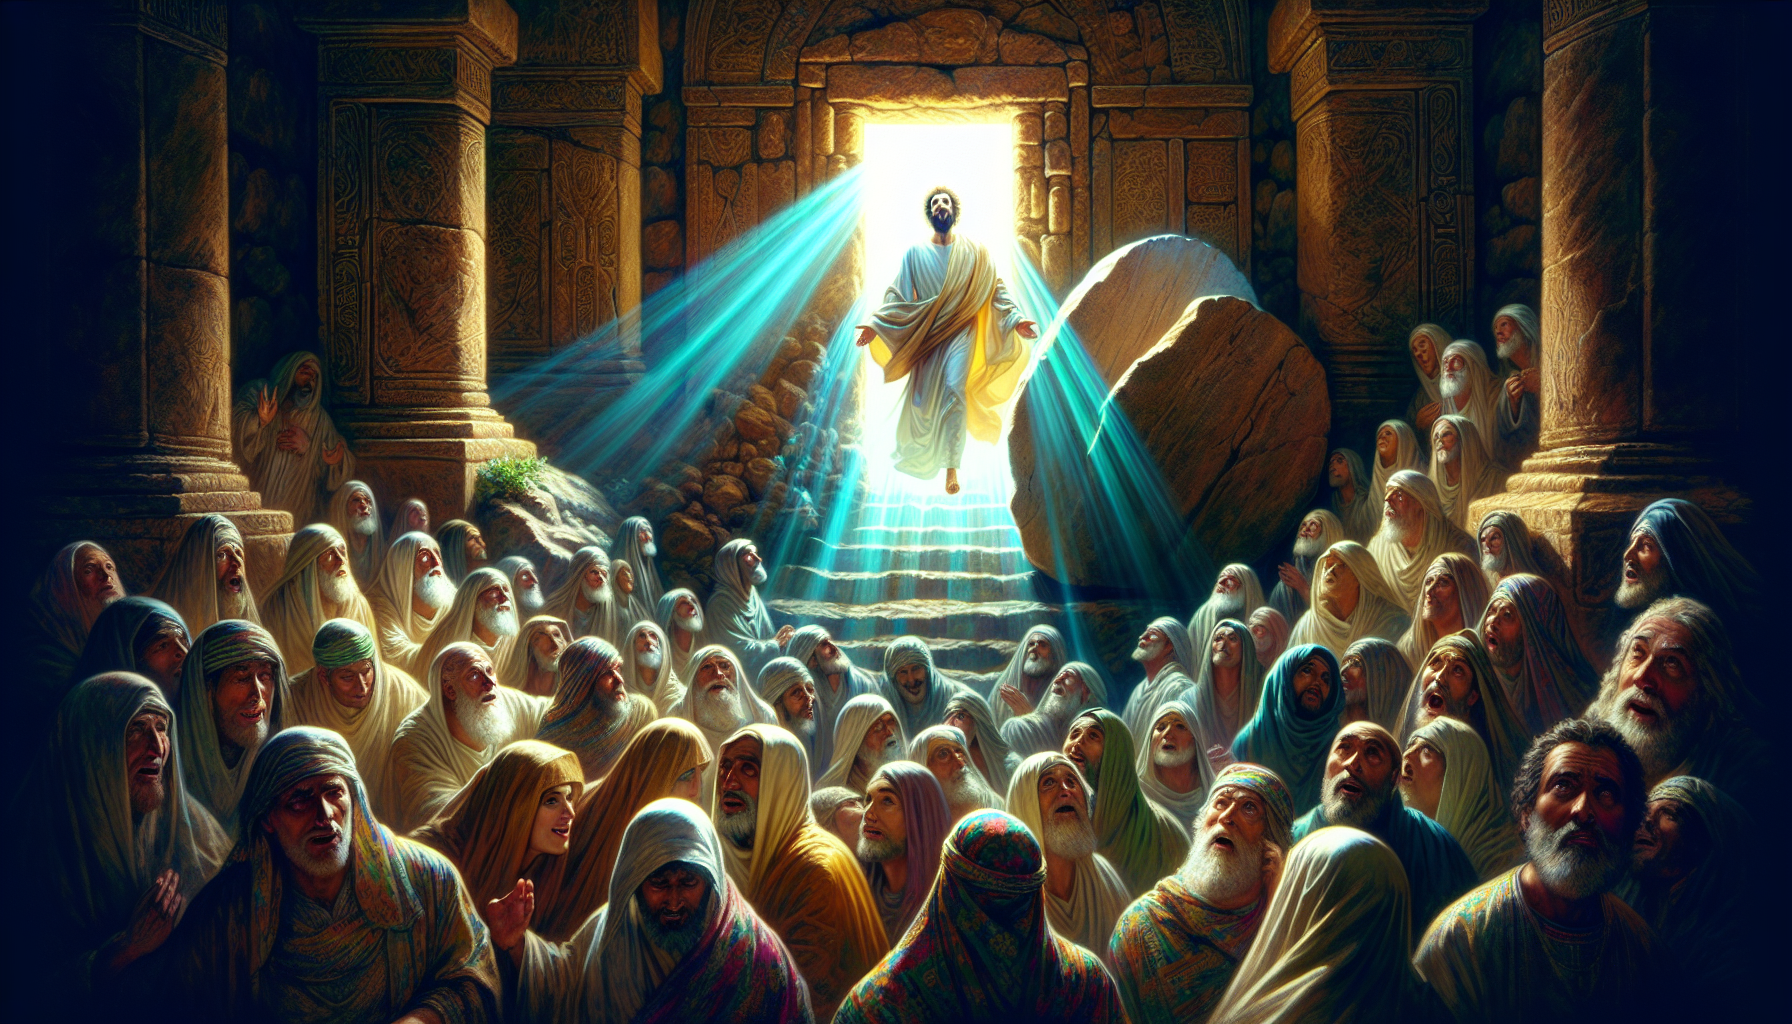 Create an image of the exact moment that Jesus is believed to have resurrected, depicting him emerging from the tomb with a radiant glow, surrounded by beams of light and a sense of awe and wonder fro